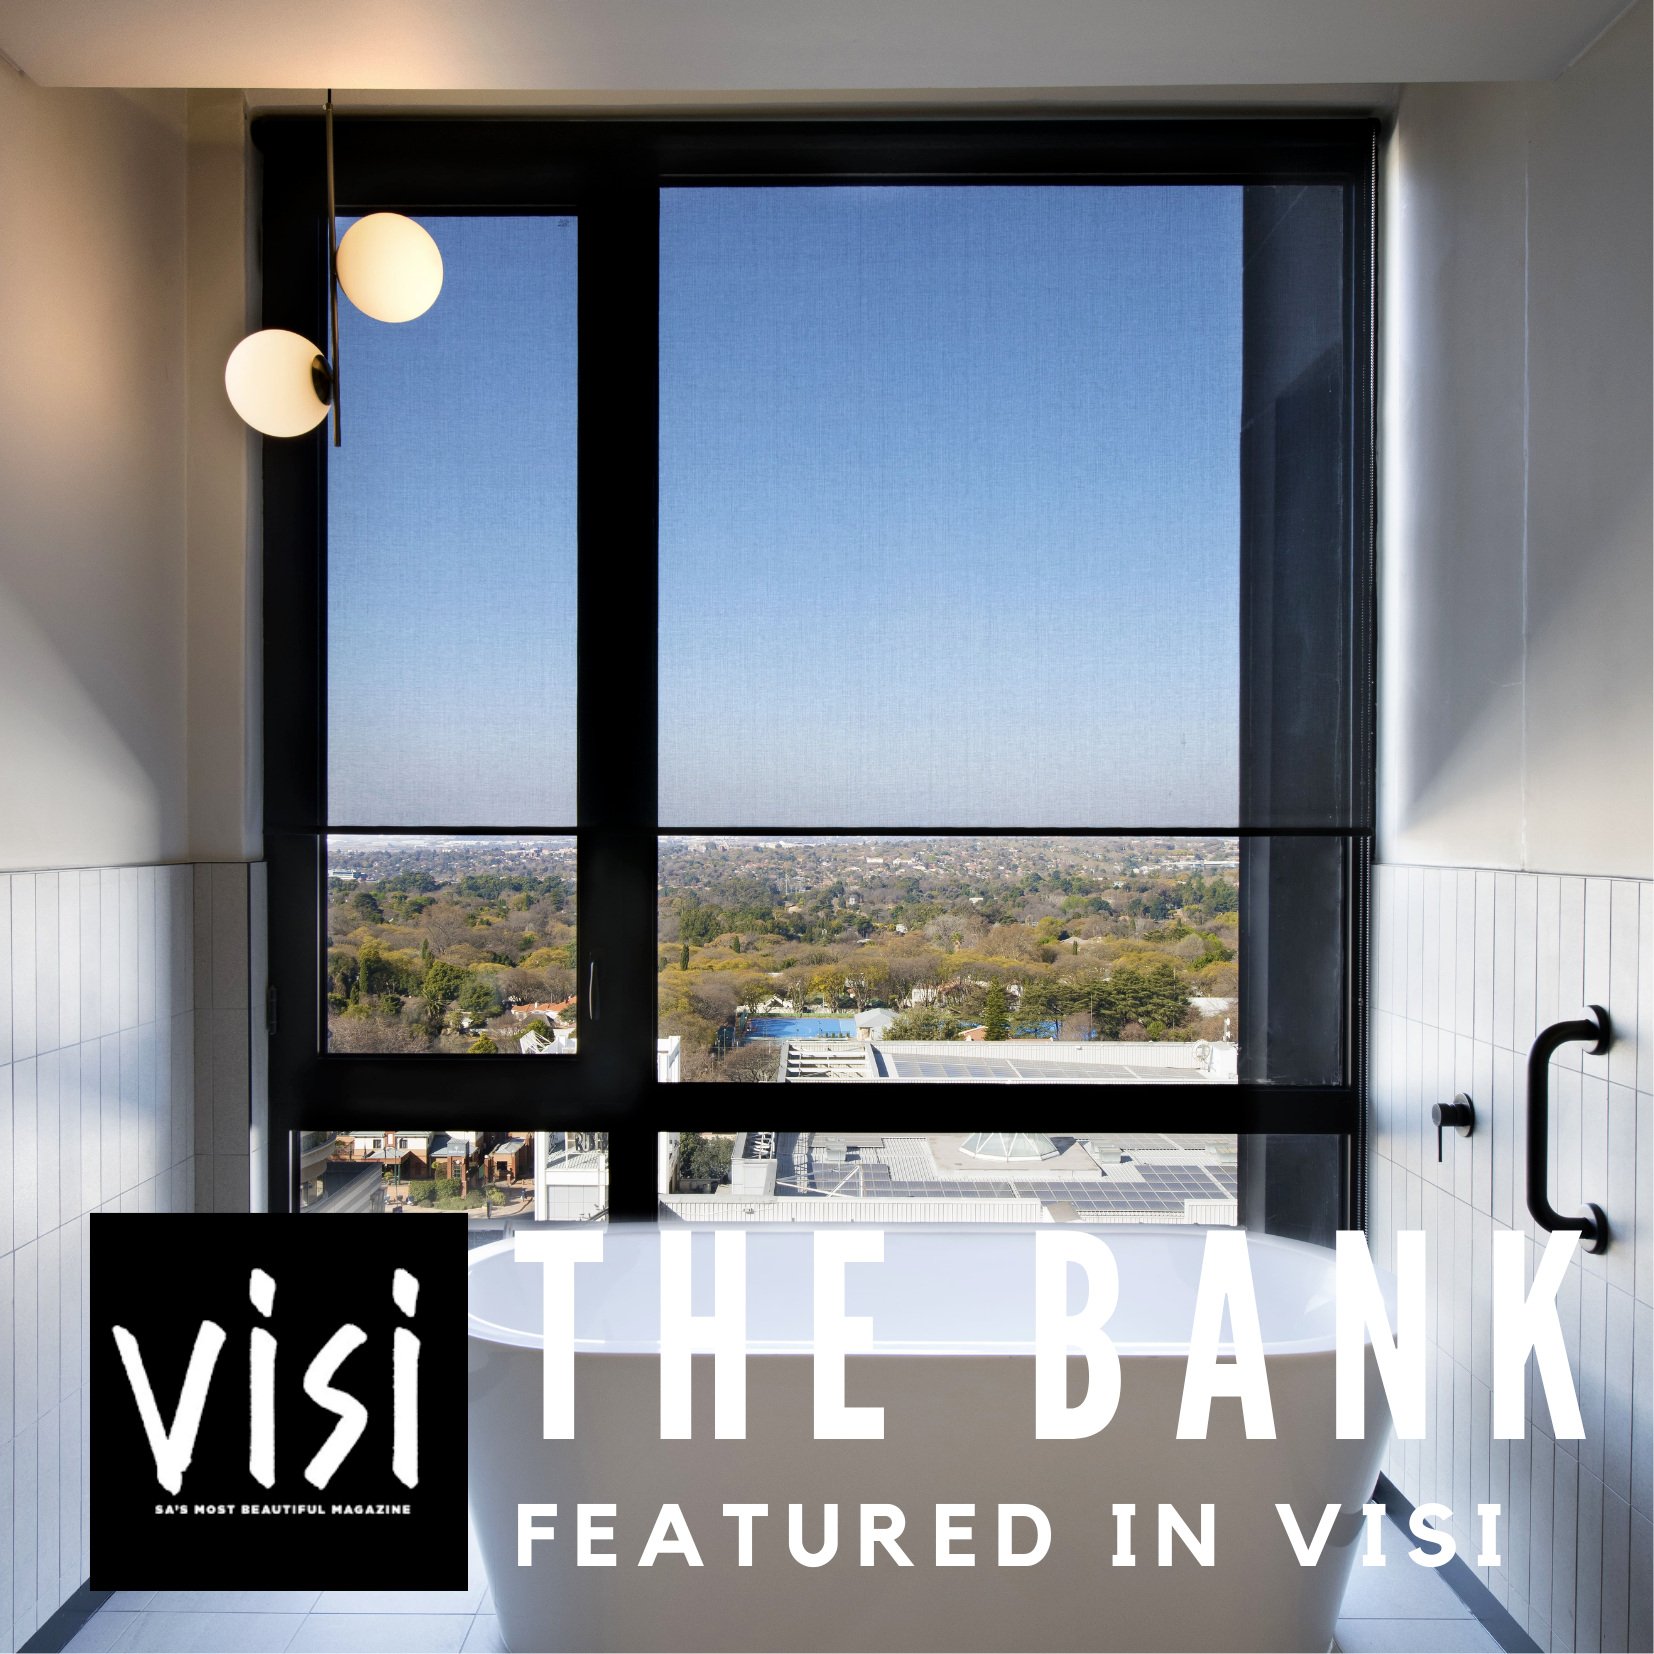 The Bank featured in VISI 